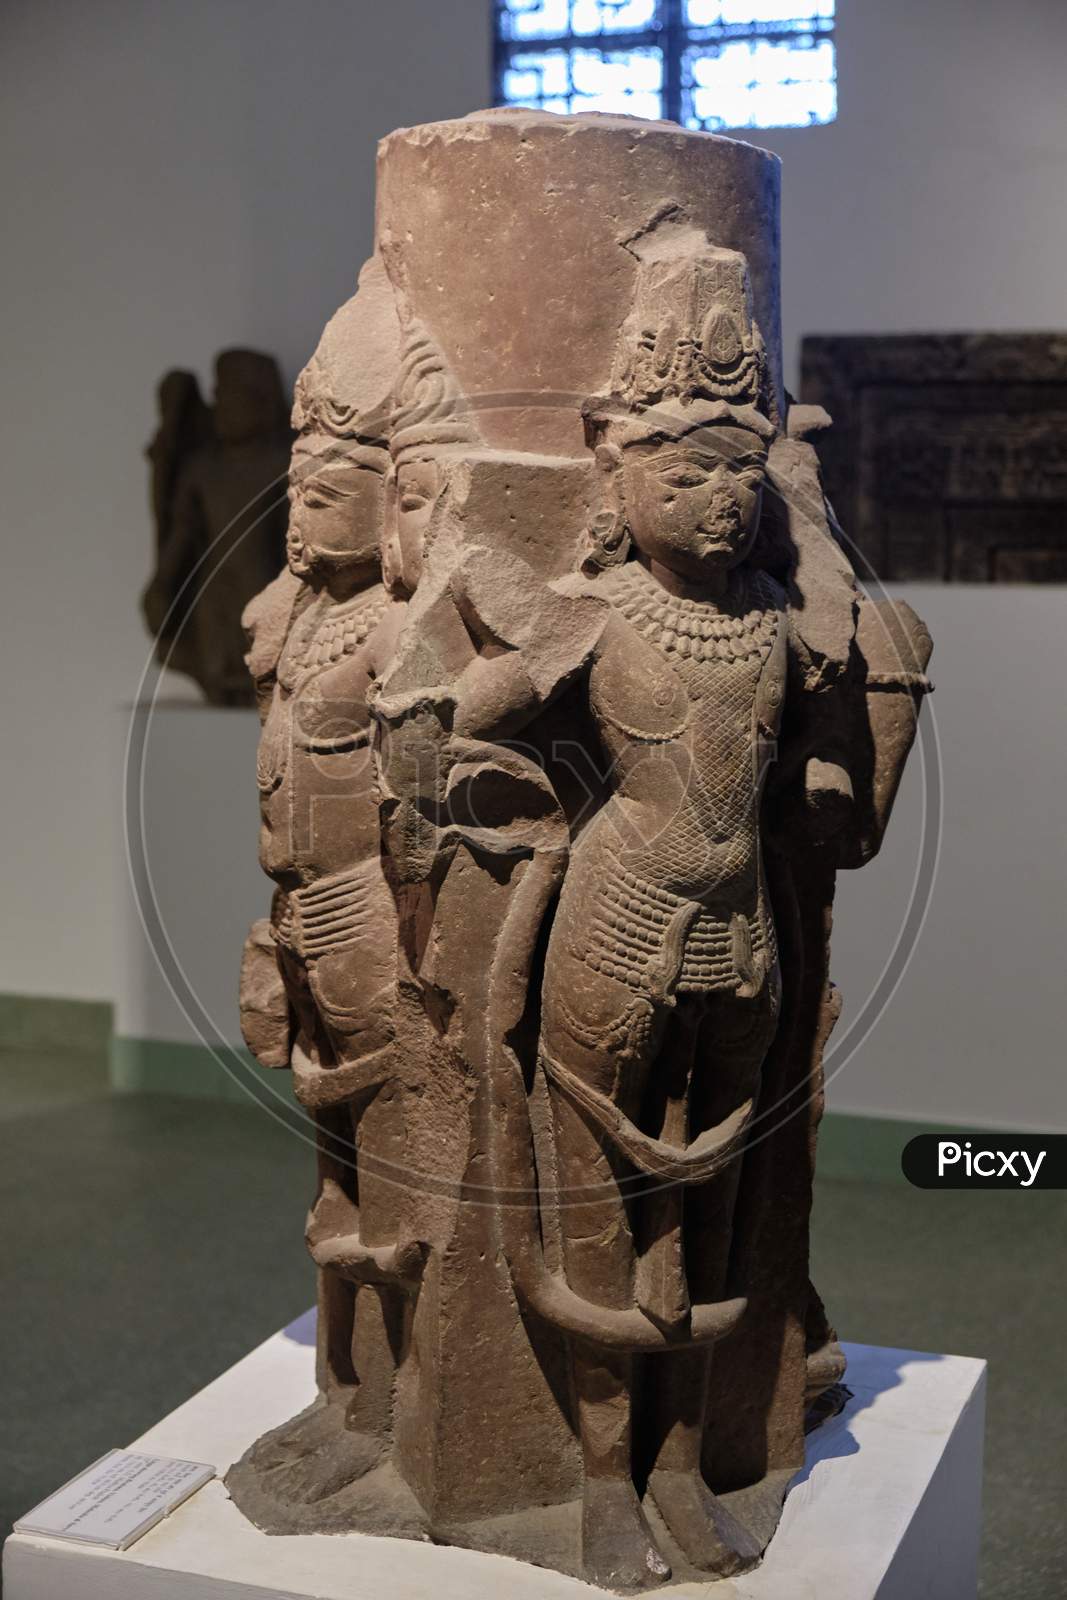 Stone Statue Of Hindu God Brahma In The National Museum Of India In New Delhi